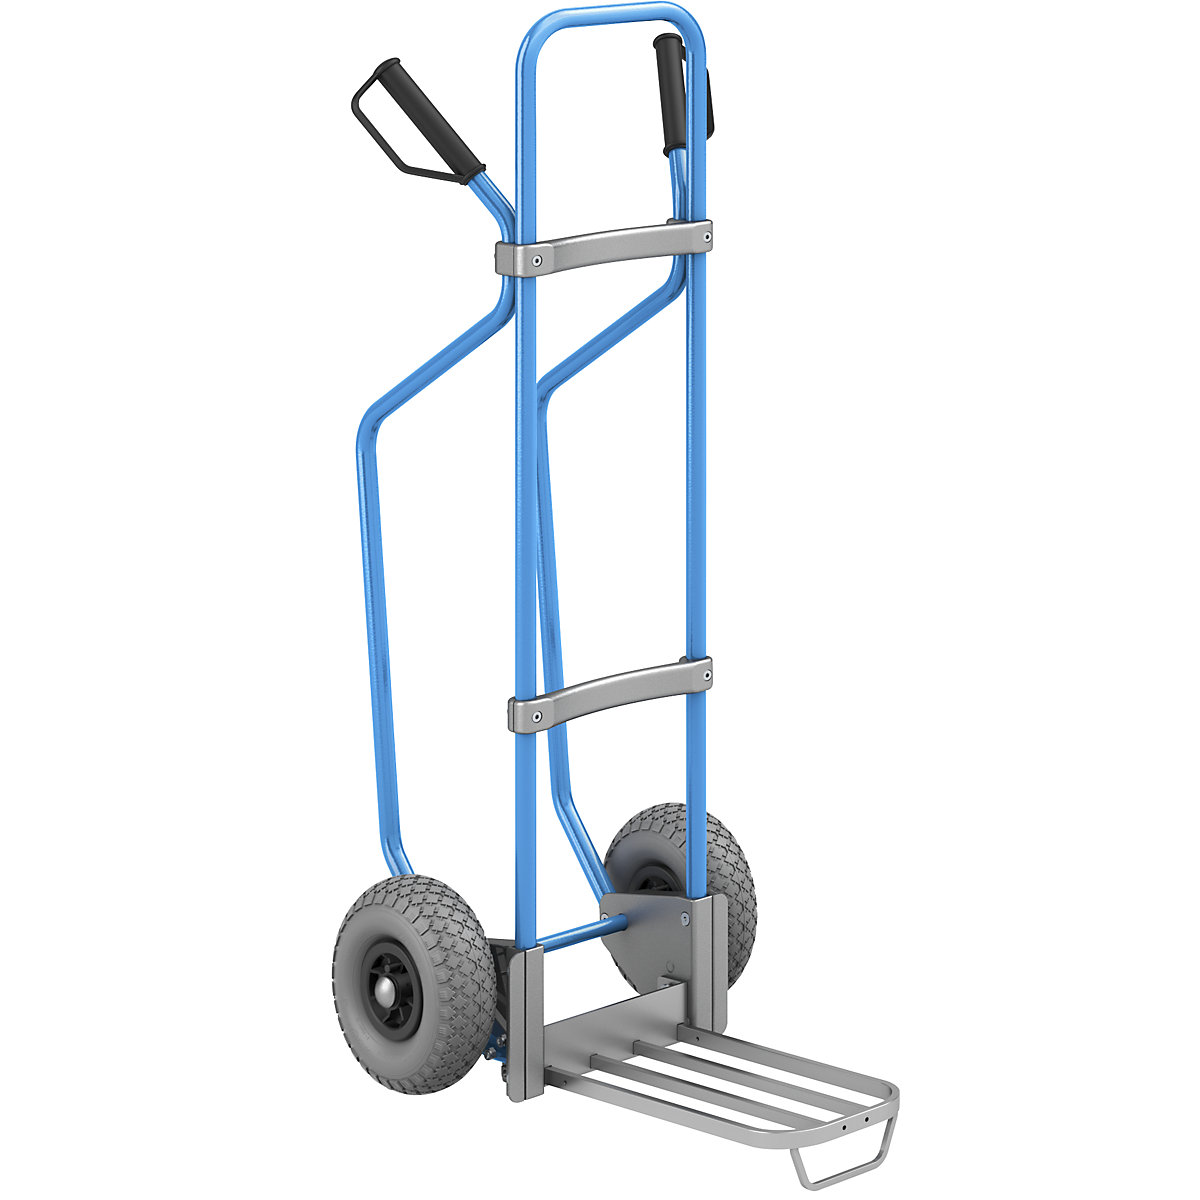 Sack truck with runners, blue – eurokraft pro, parcel footplate WxD 430 x 250 mm, aluminium, with handle, PU tyres, 2+ items-2